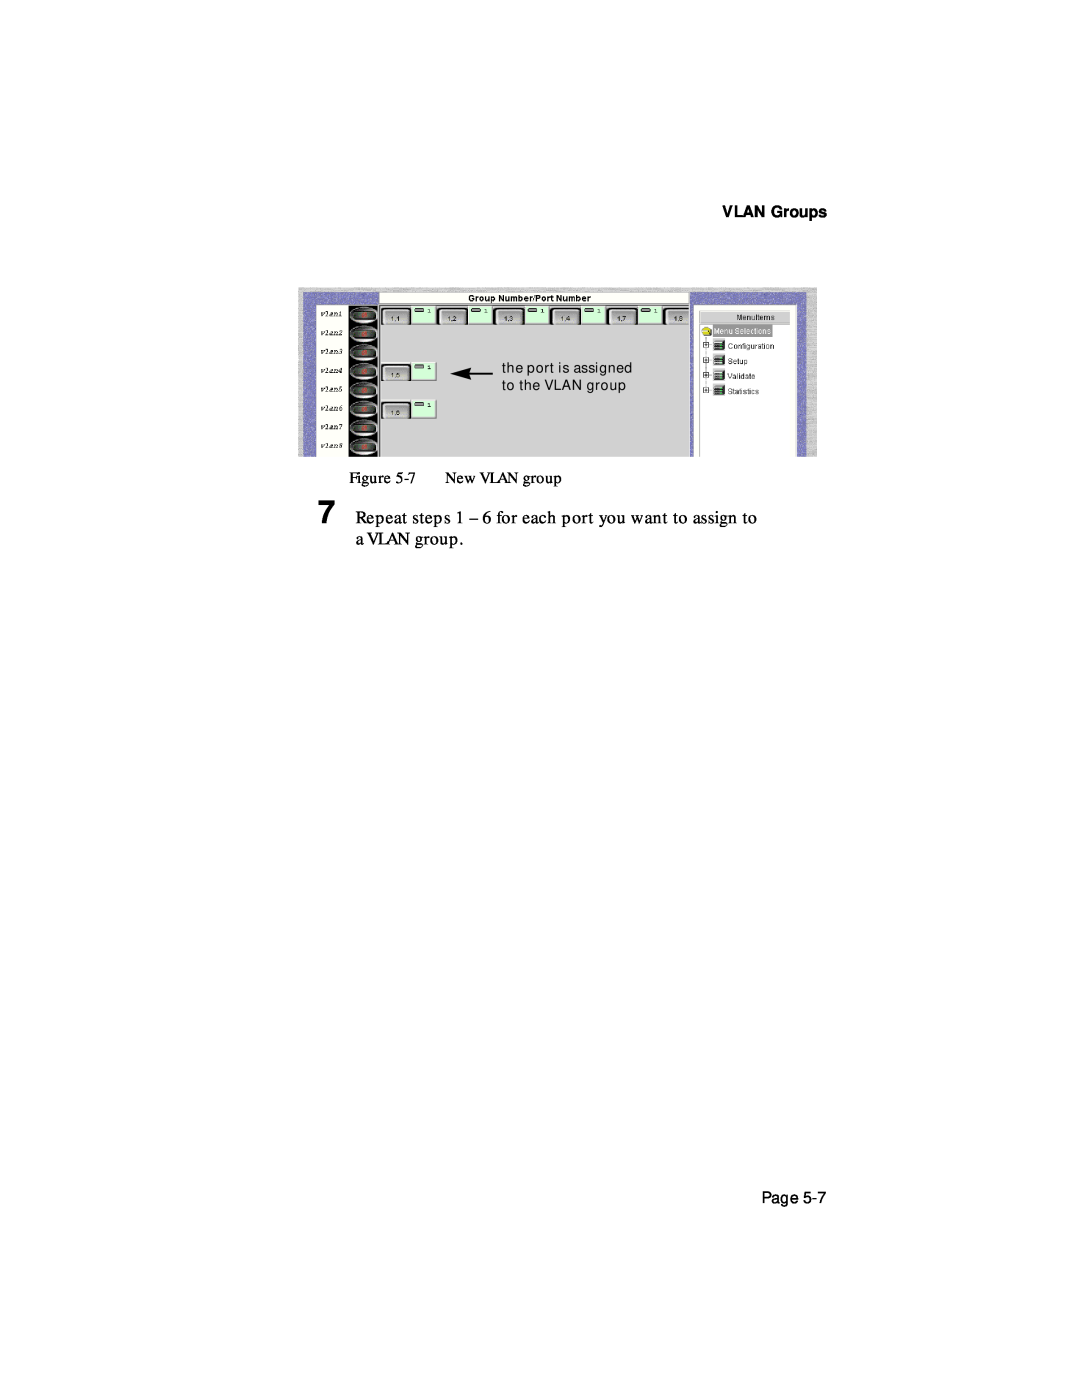 Asante Technologies 1000 user manual Repeat steps 1 - 6 for each port you want to assign to a VLAN group, VLAN Groups, Page 